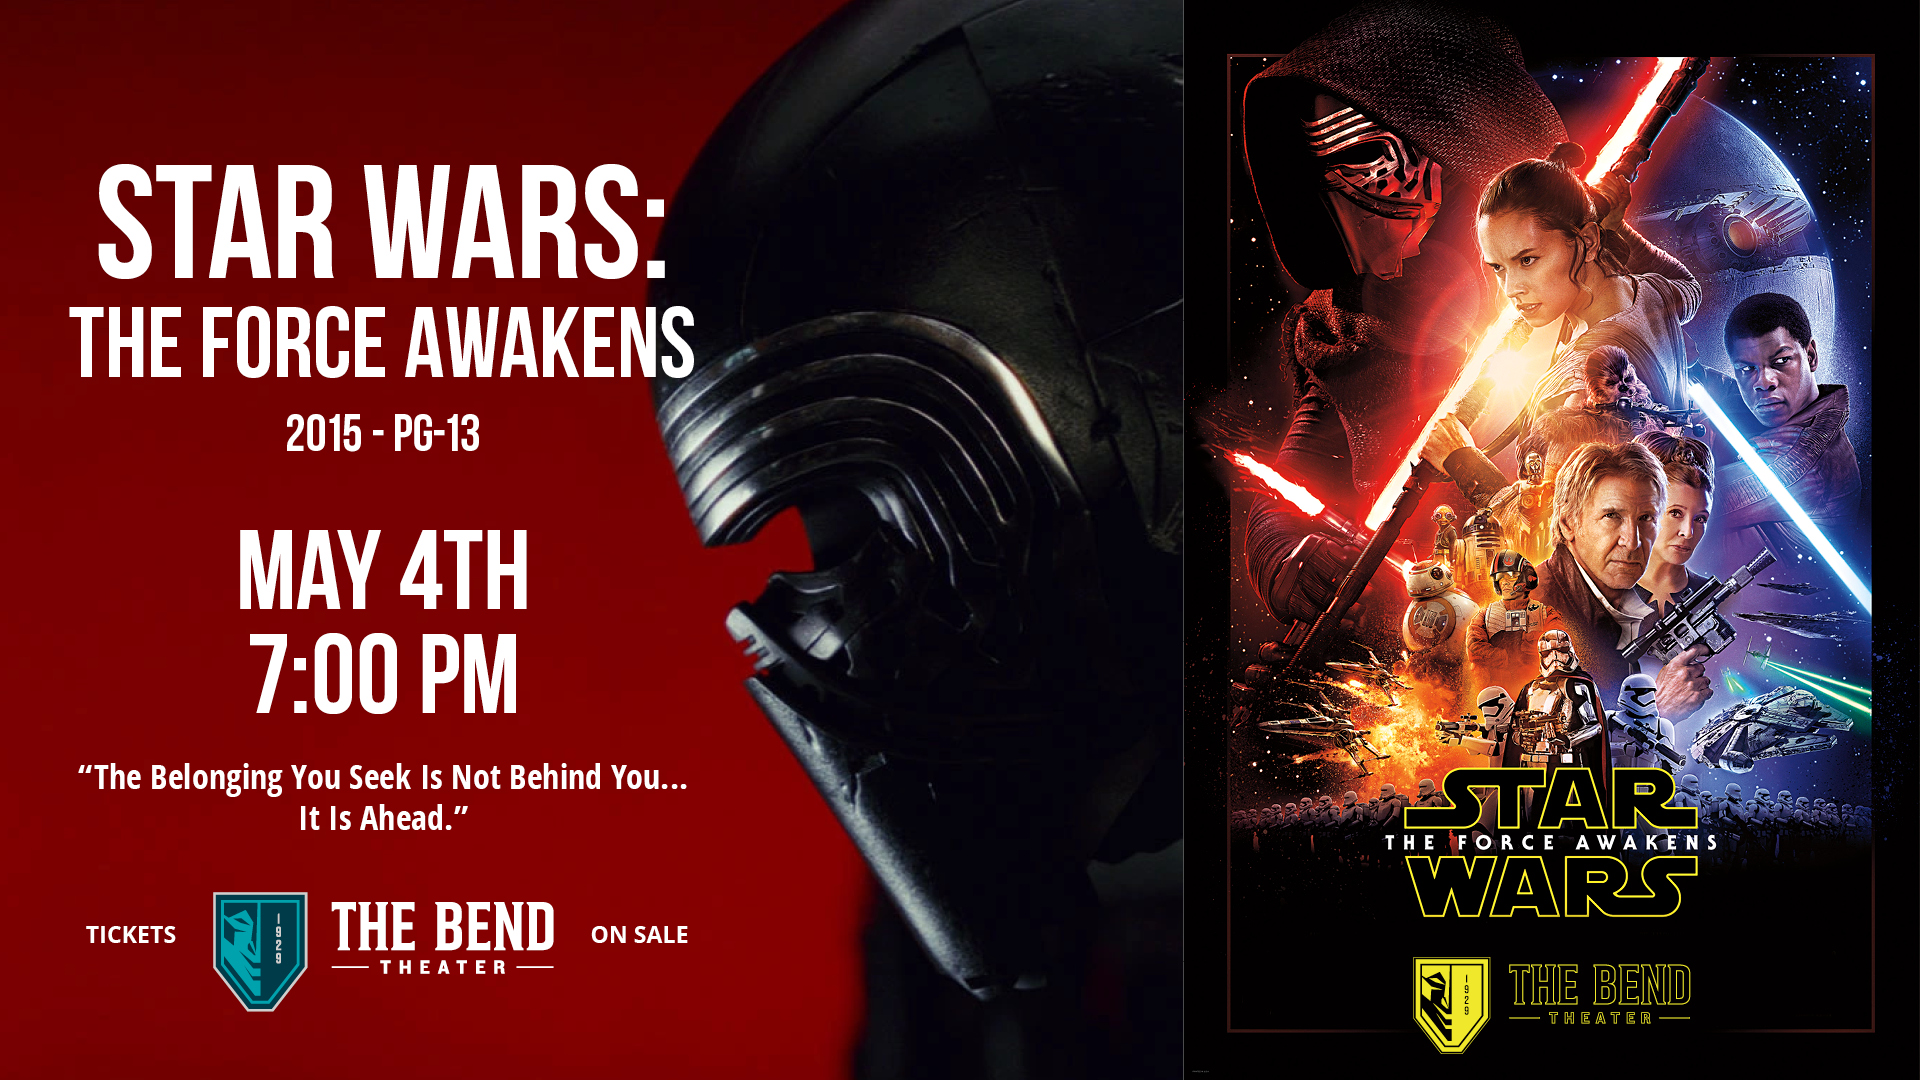 Star Wars: The Force Awakens at The Bend Theater